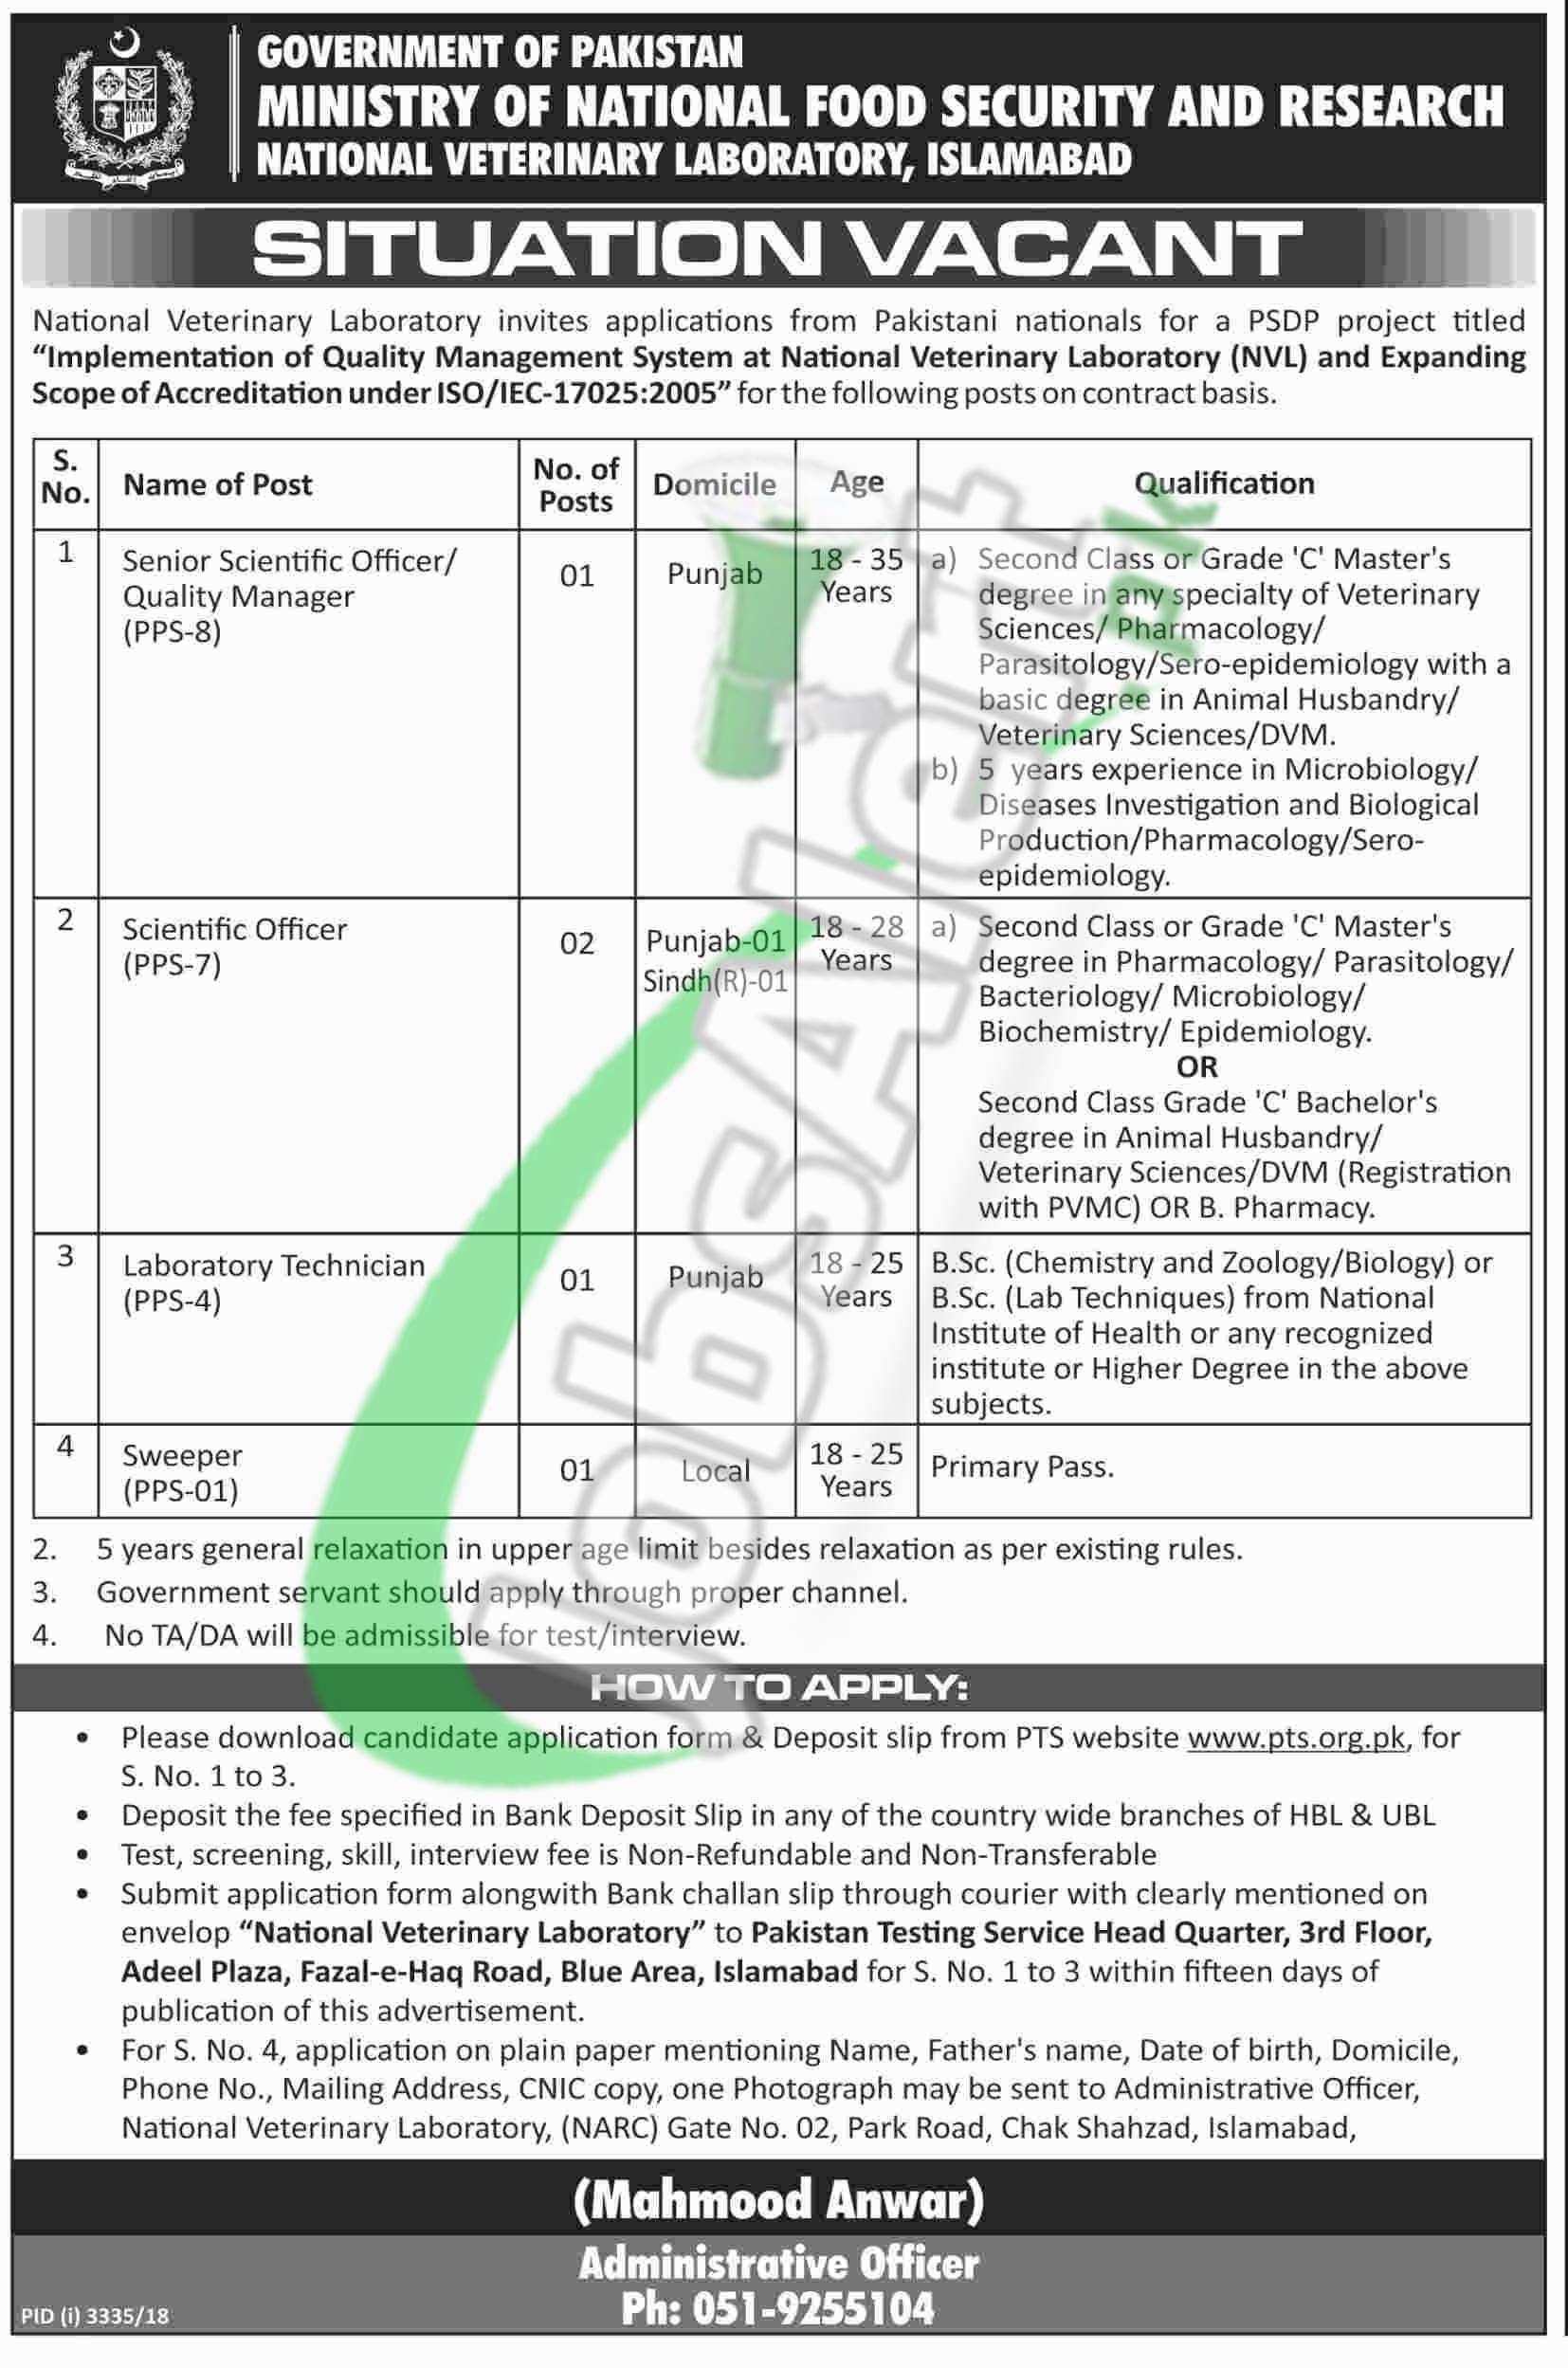 Ministry of National Food Security and Research Jobs 2019